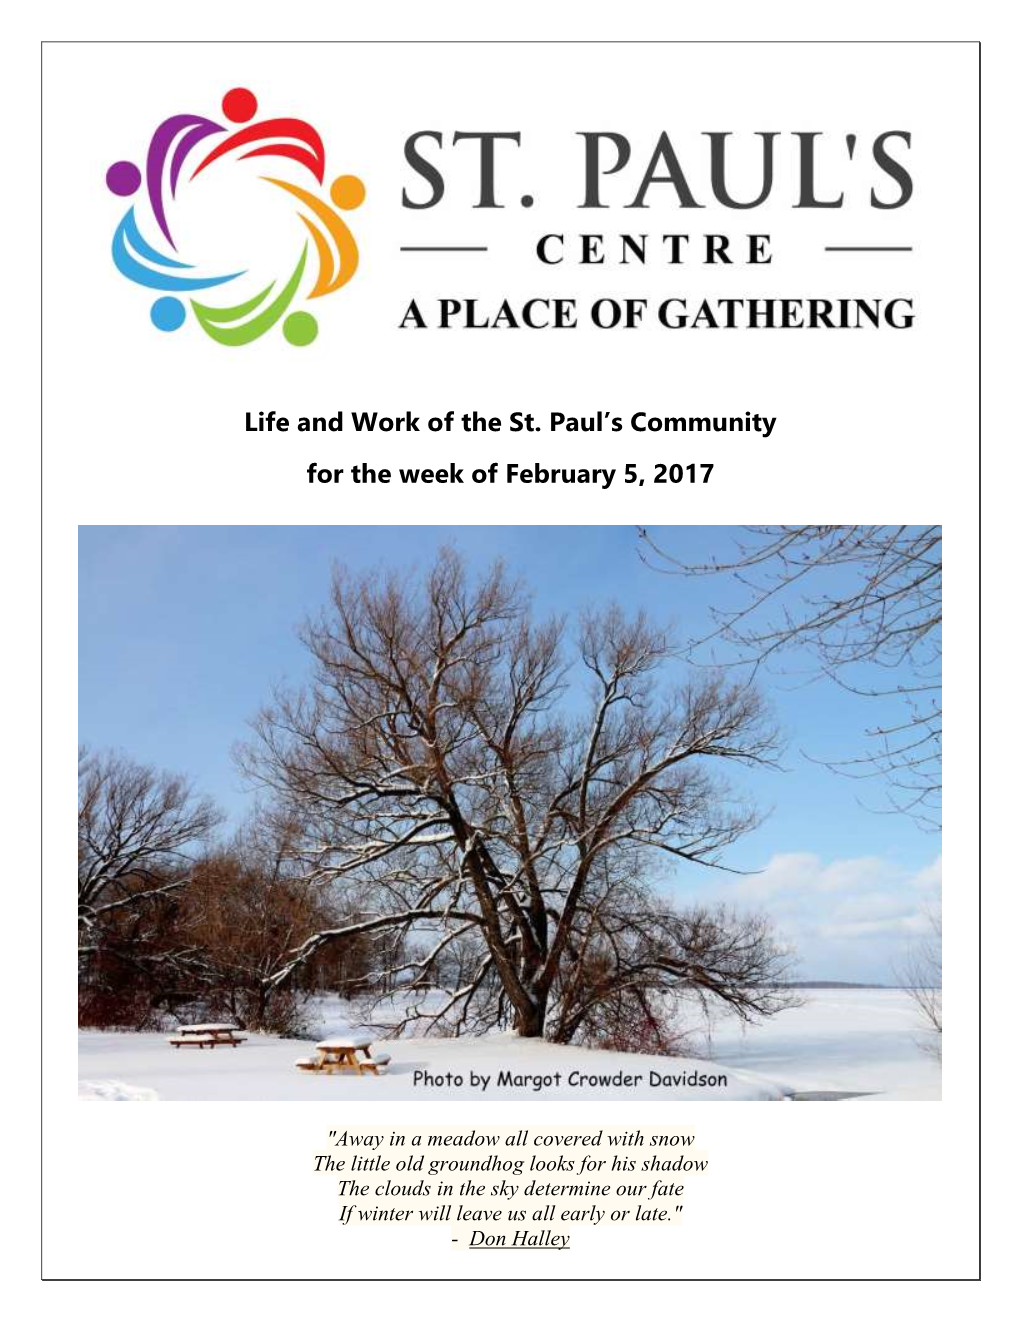 Life and Work of the St. Paul's Community for The